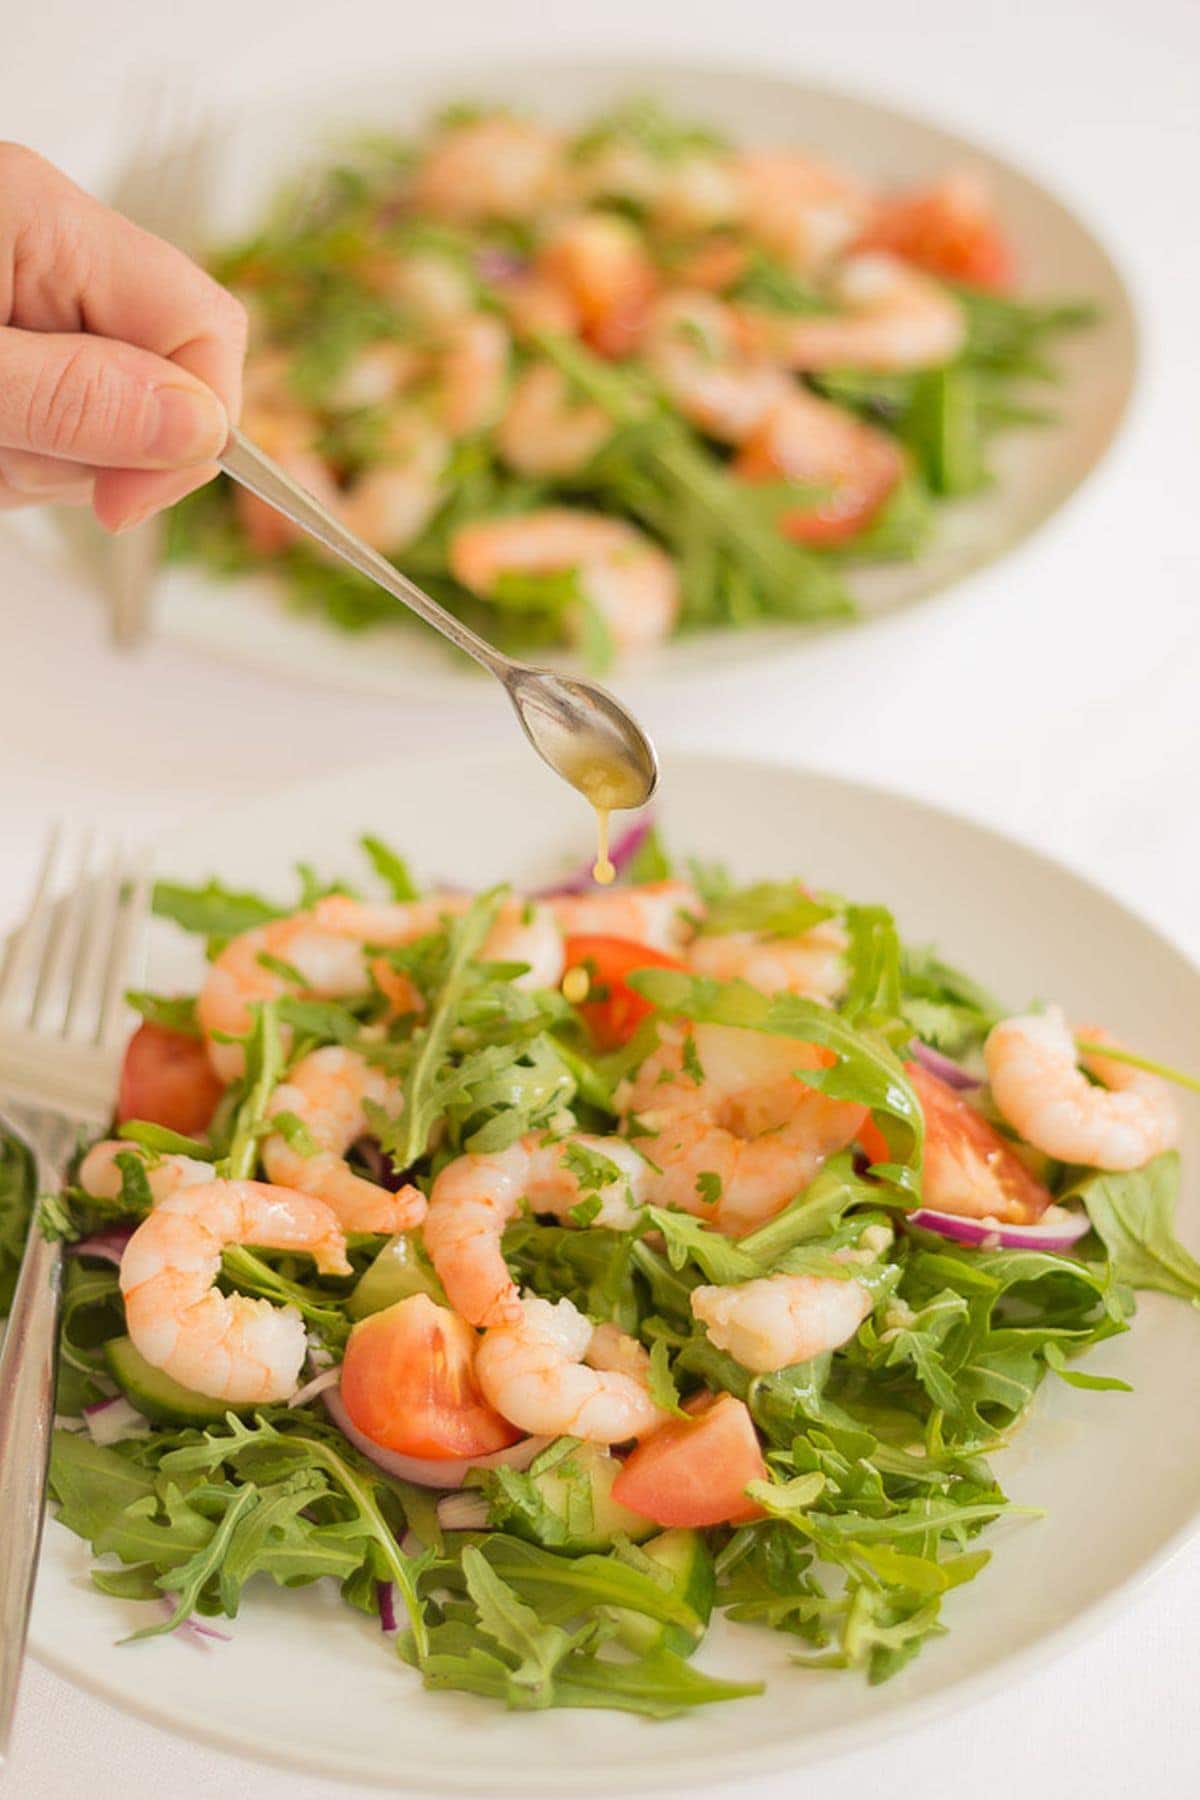 Two plates of king prawn and rocket salad one in front of the other. Dressing being added by teaspoon to the front plate.